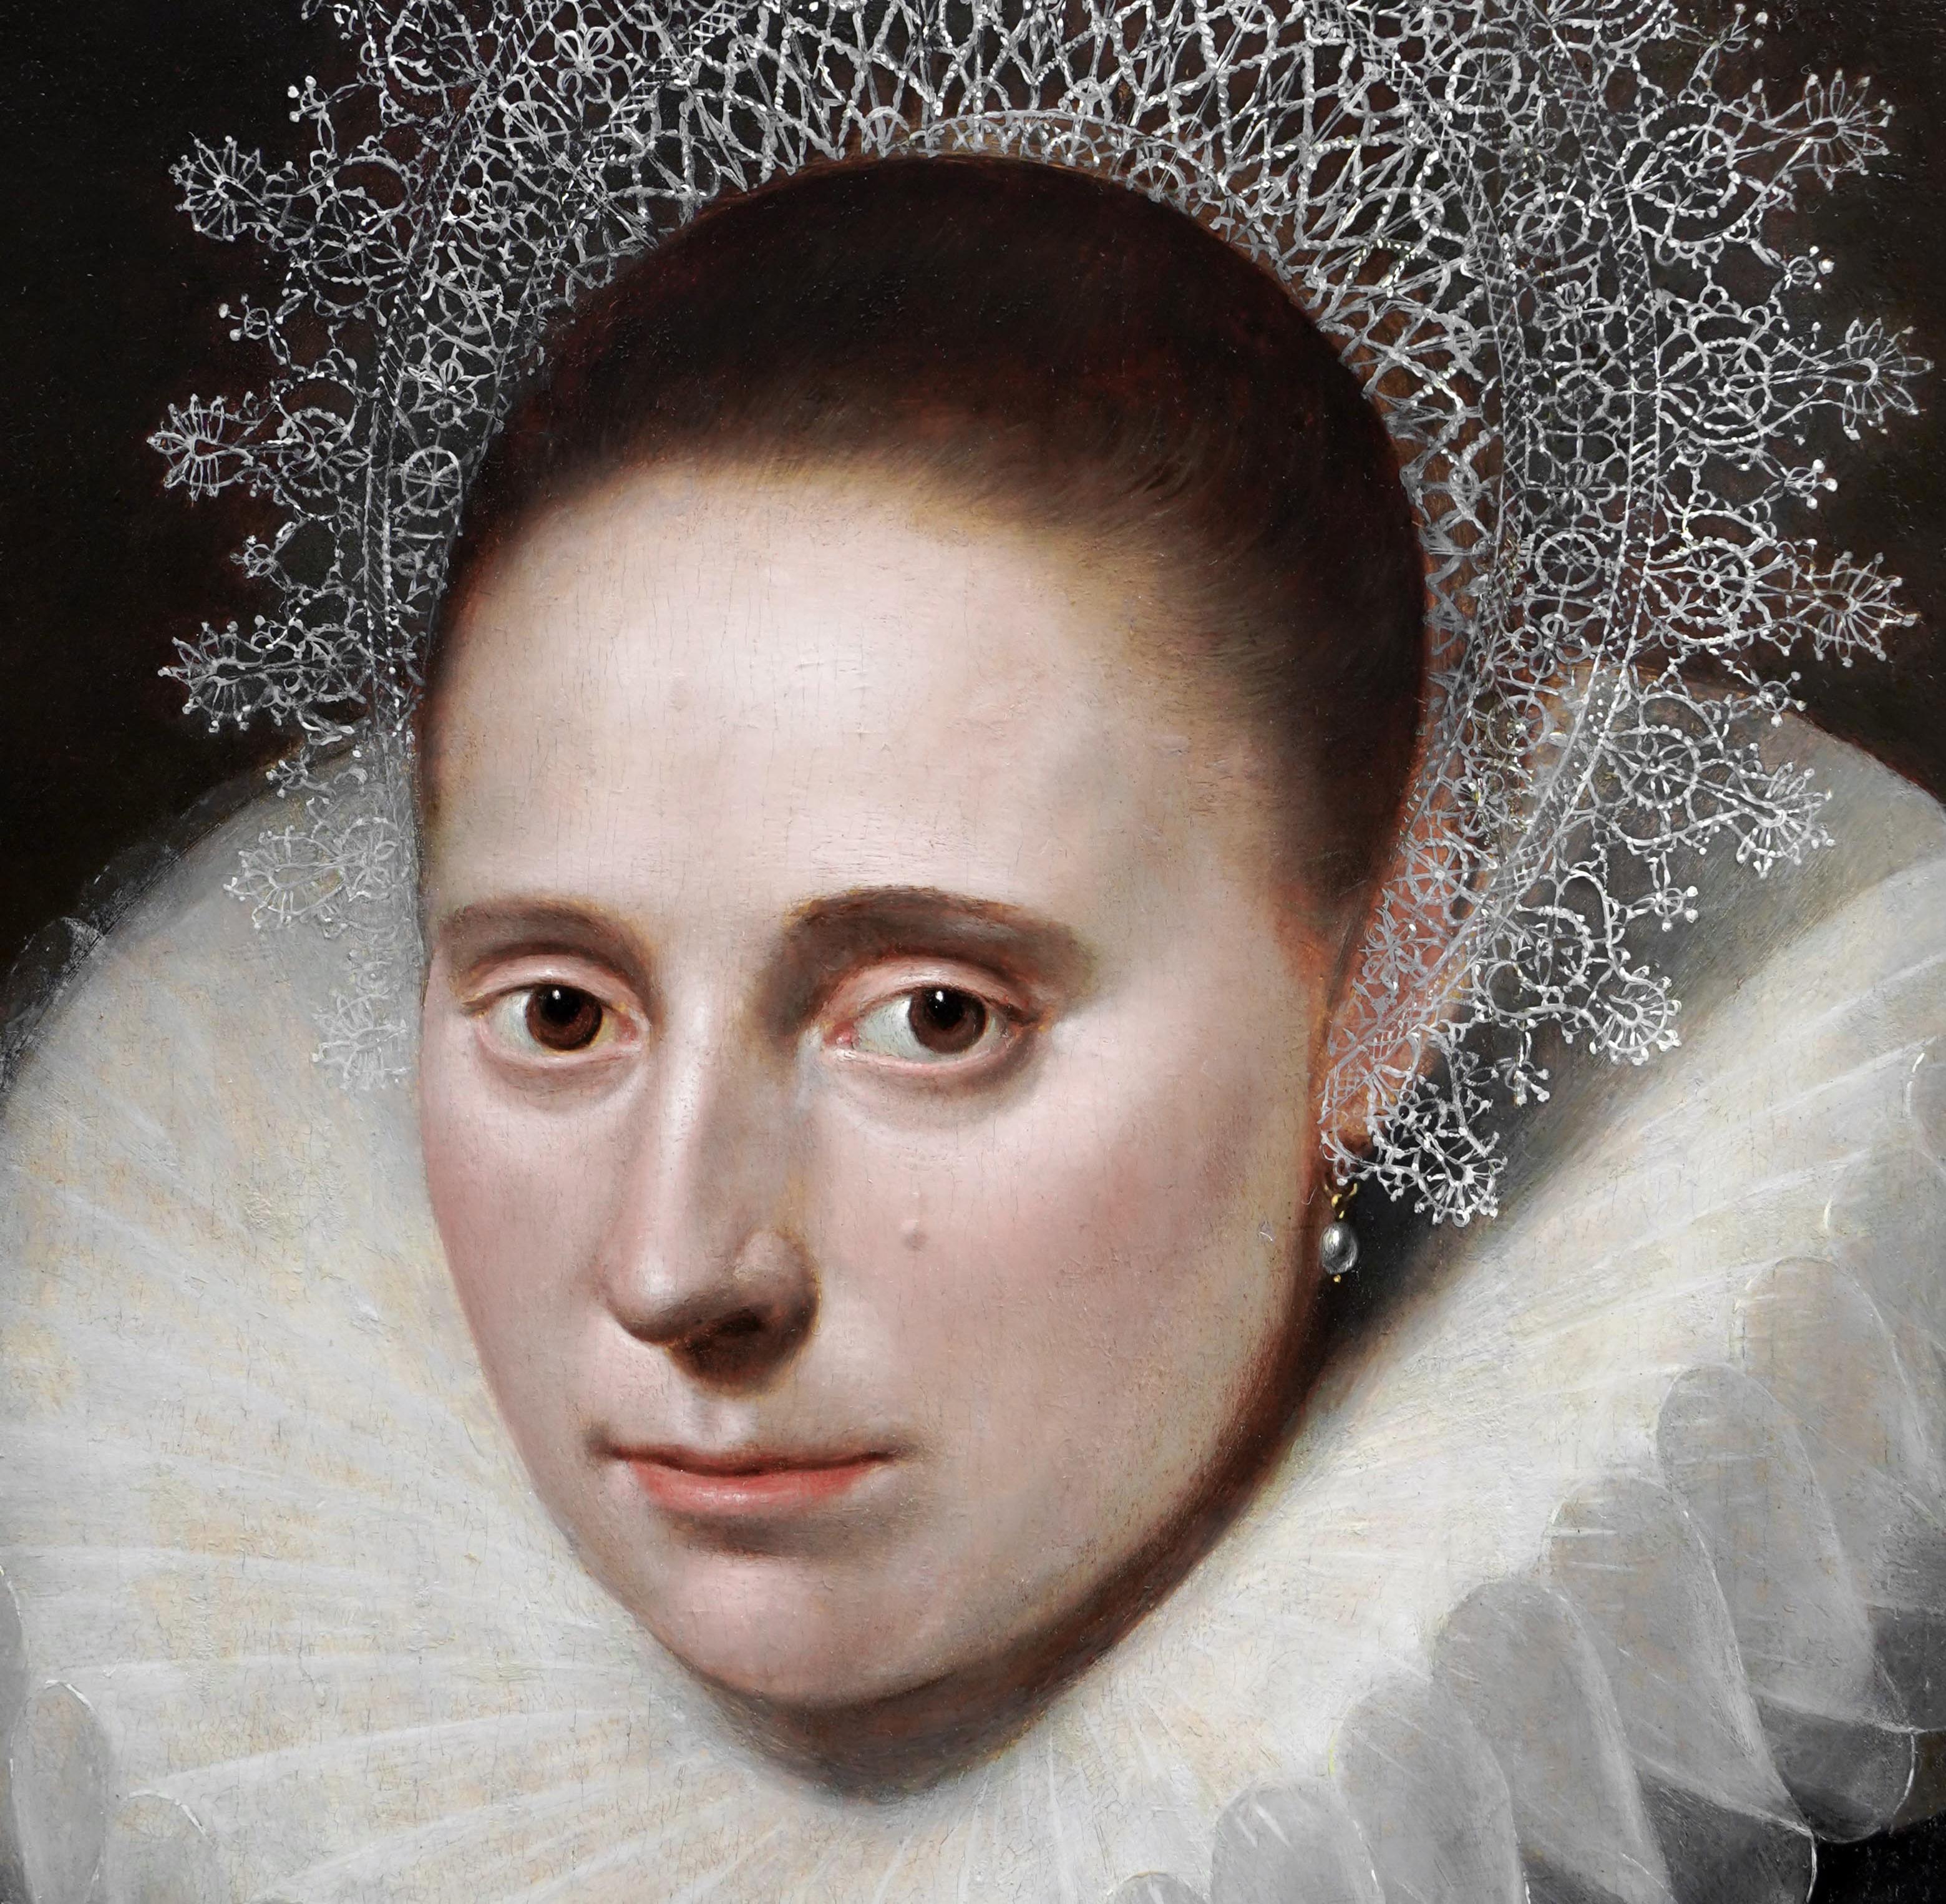 Portrait of a Lady in an Elaborate Ruff & Lace Coif c.1610-20, Dutch Old Master For Sale 3